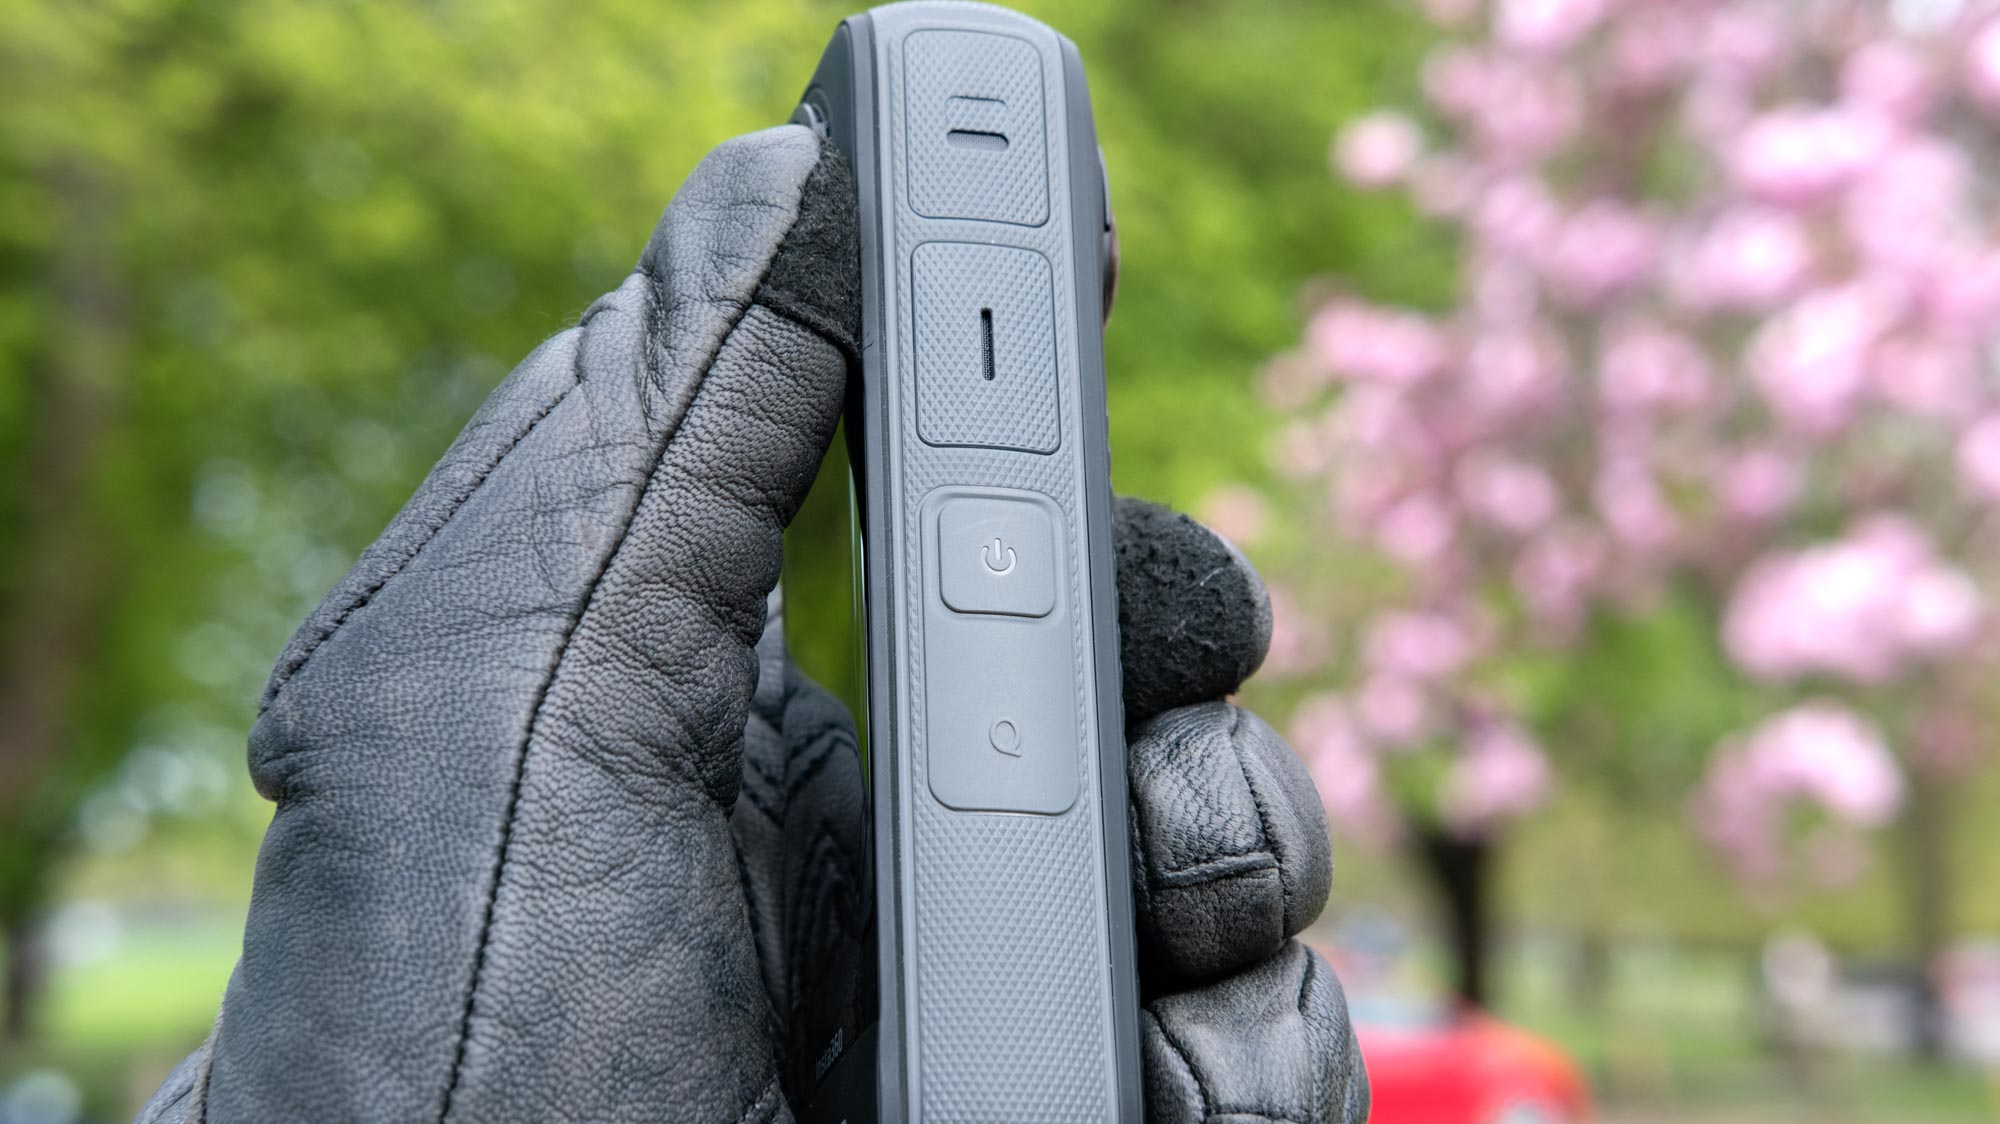 A photo of the Insta360 X4 being held in a leather gloved hand with the side Q and power buttons showing.